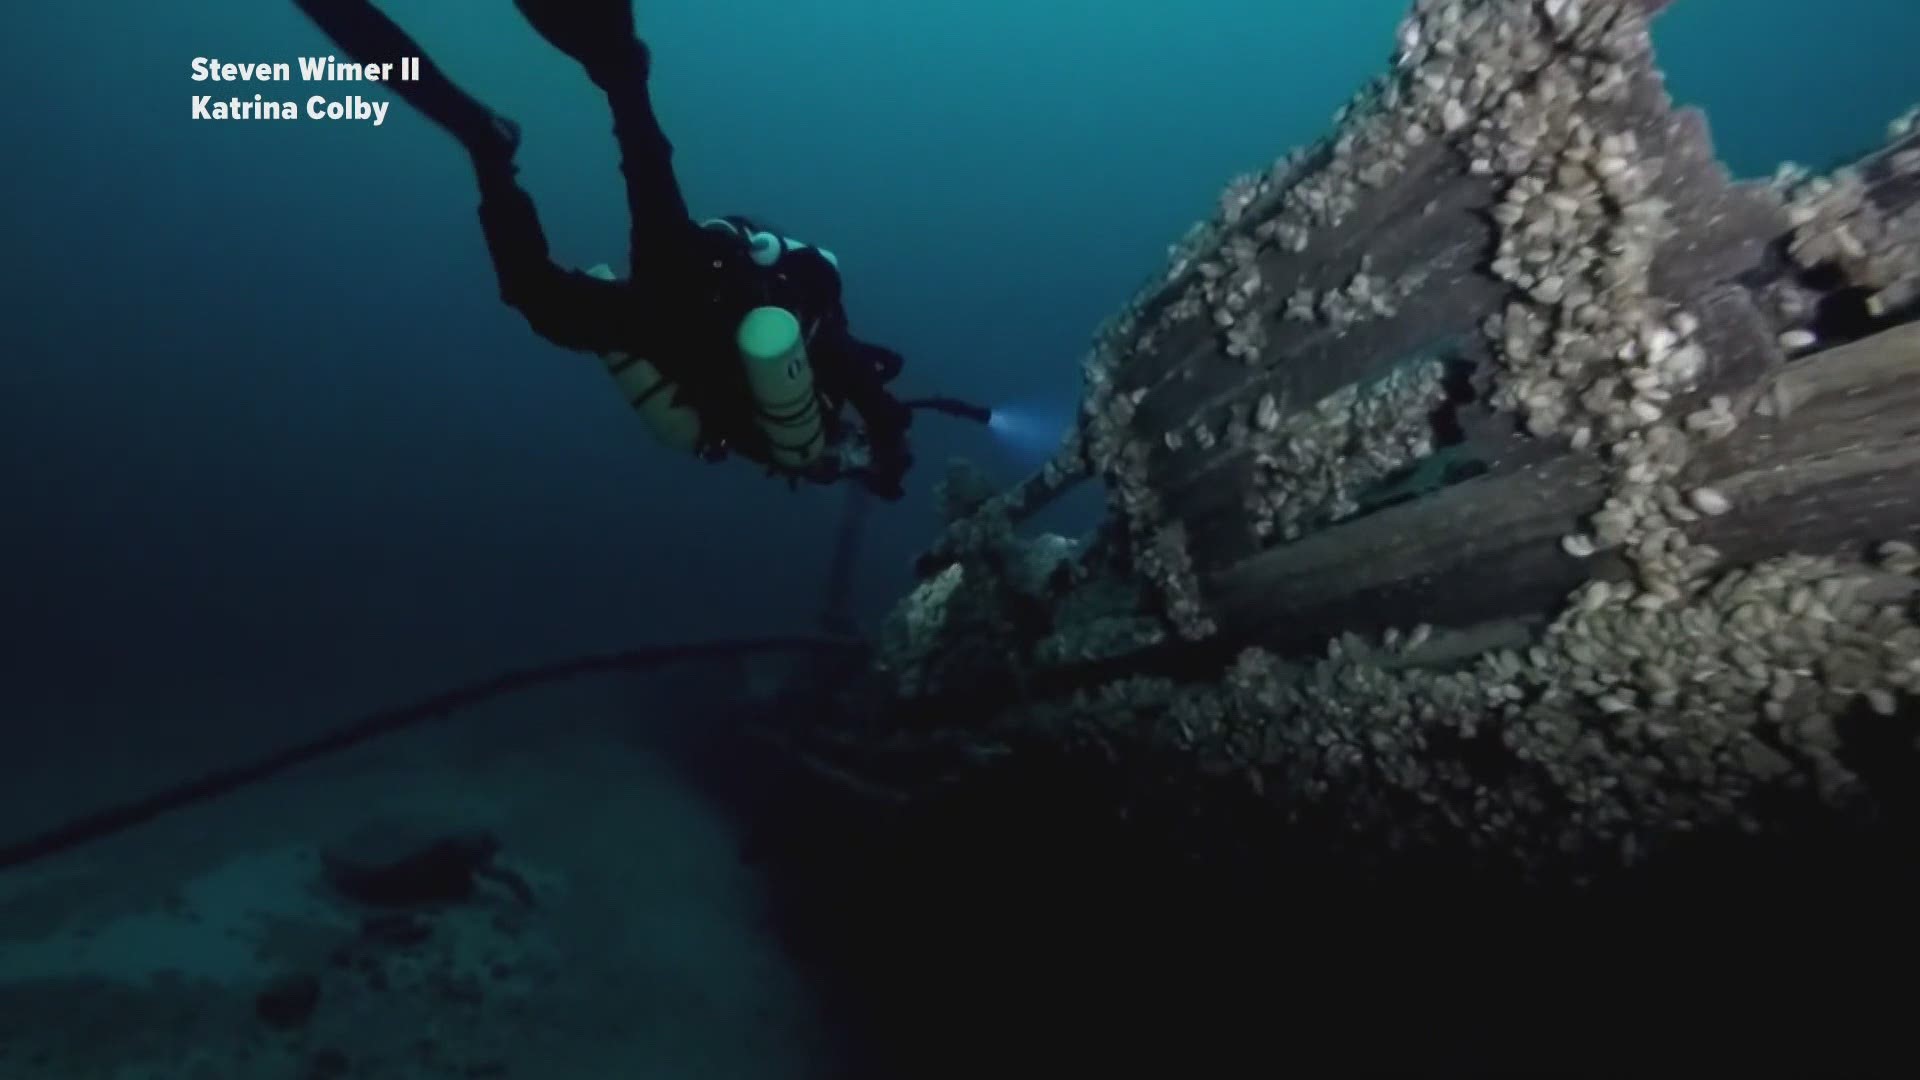 1885 shipwreck 'Jarvis Lord' discovered, identified in Lake Michigan.